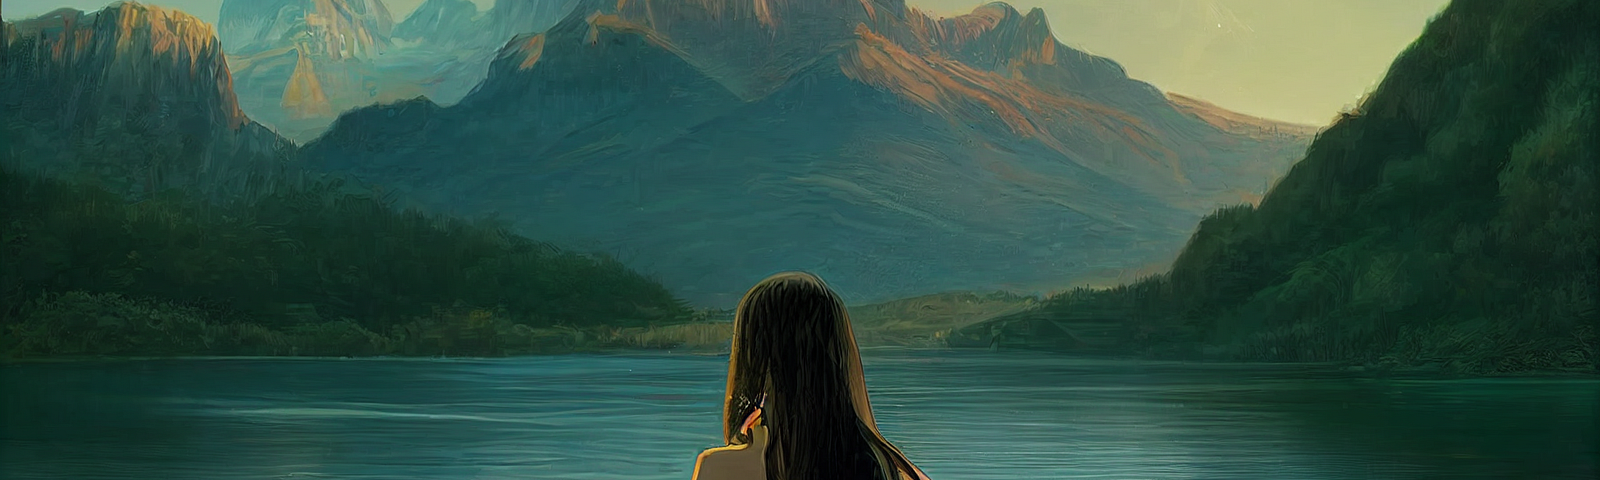 A woman in a lake, mountains in the background